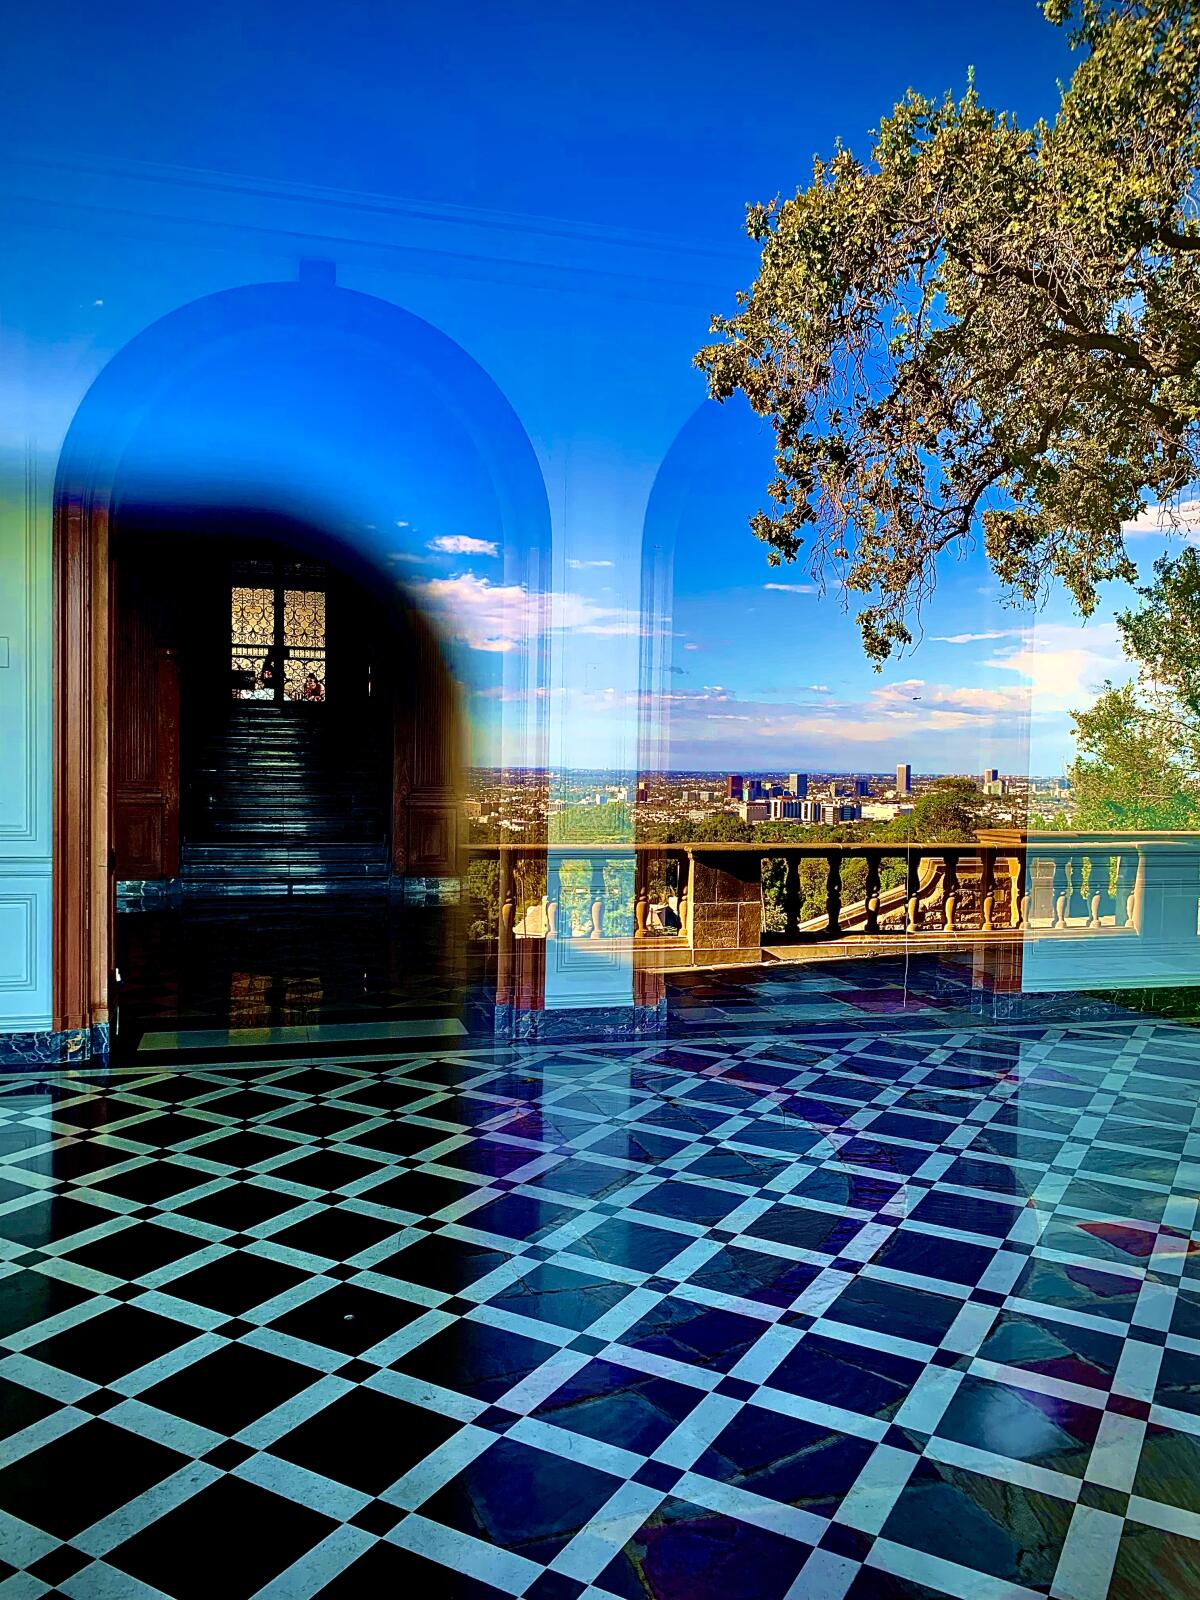 A scenic view reflected in the windows of Greystone Mansion in Beverly Hills